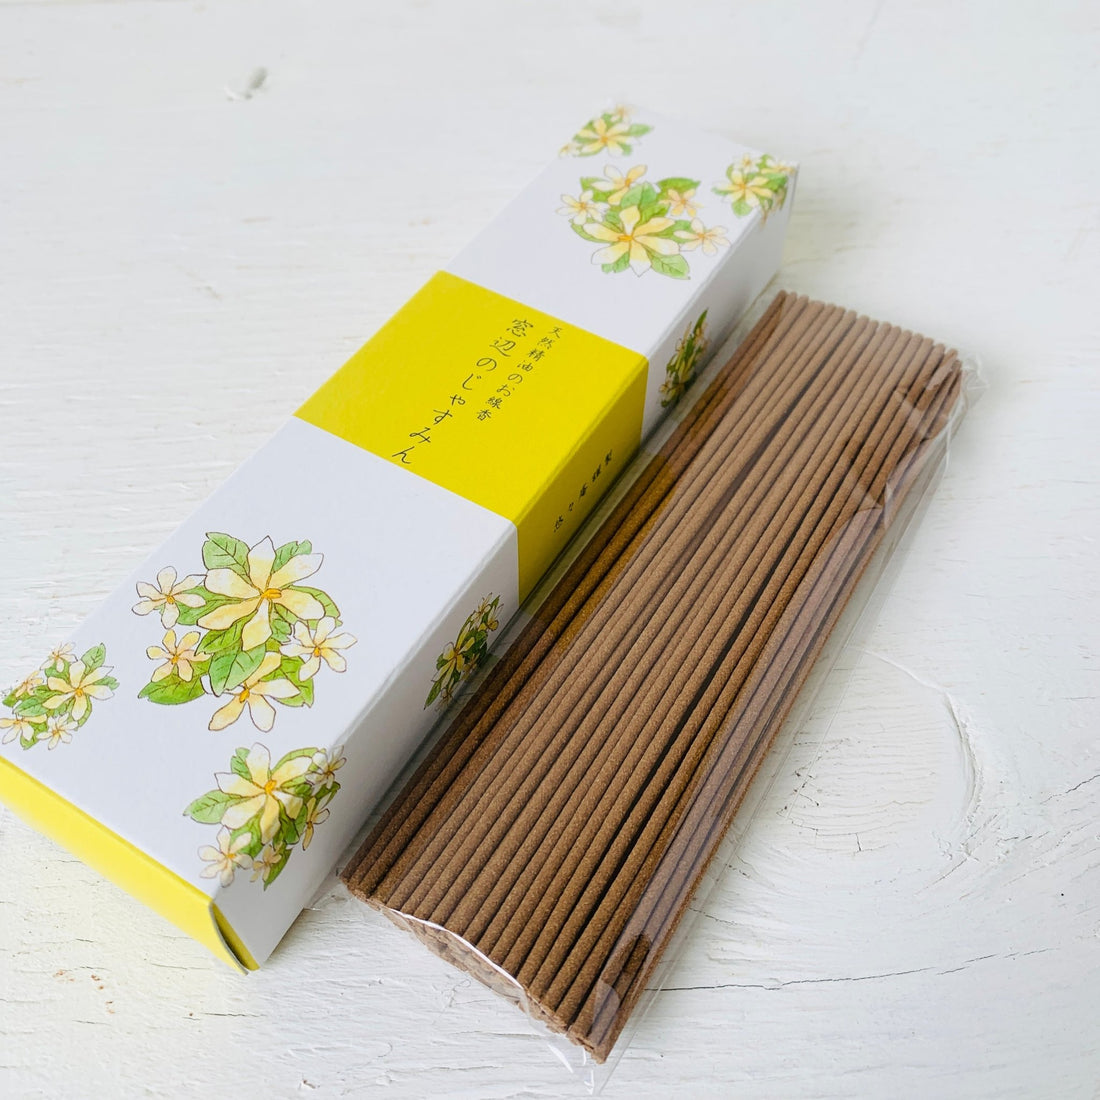 You You Ang - Essential oil incense - MIKAFleur